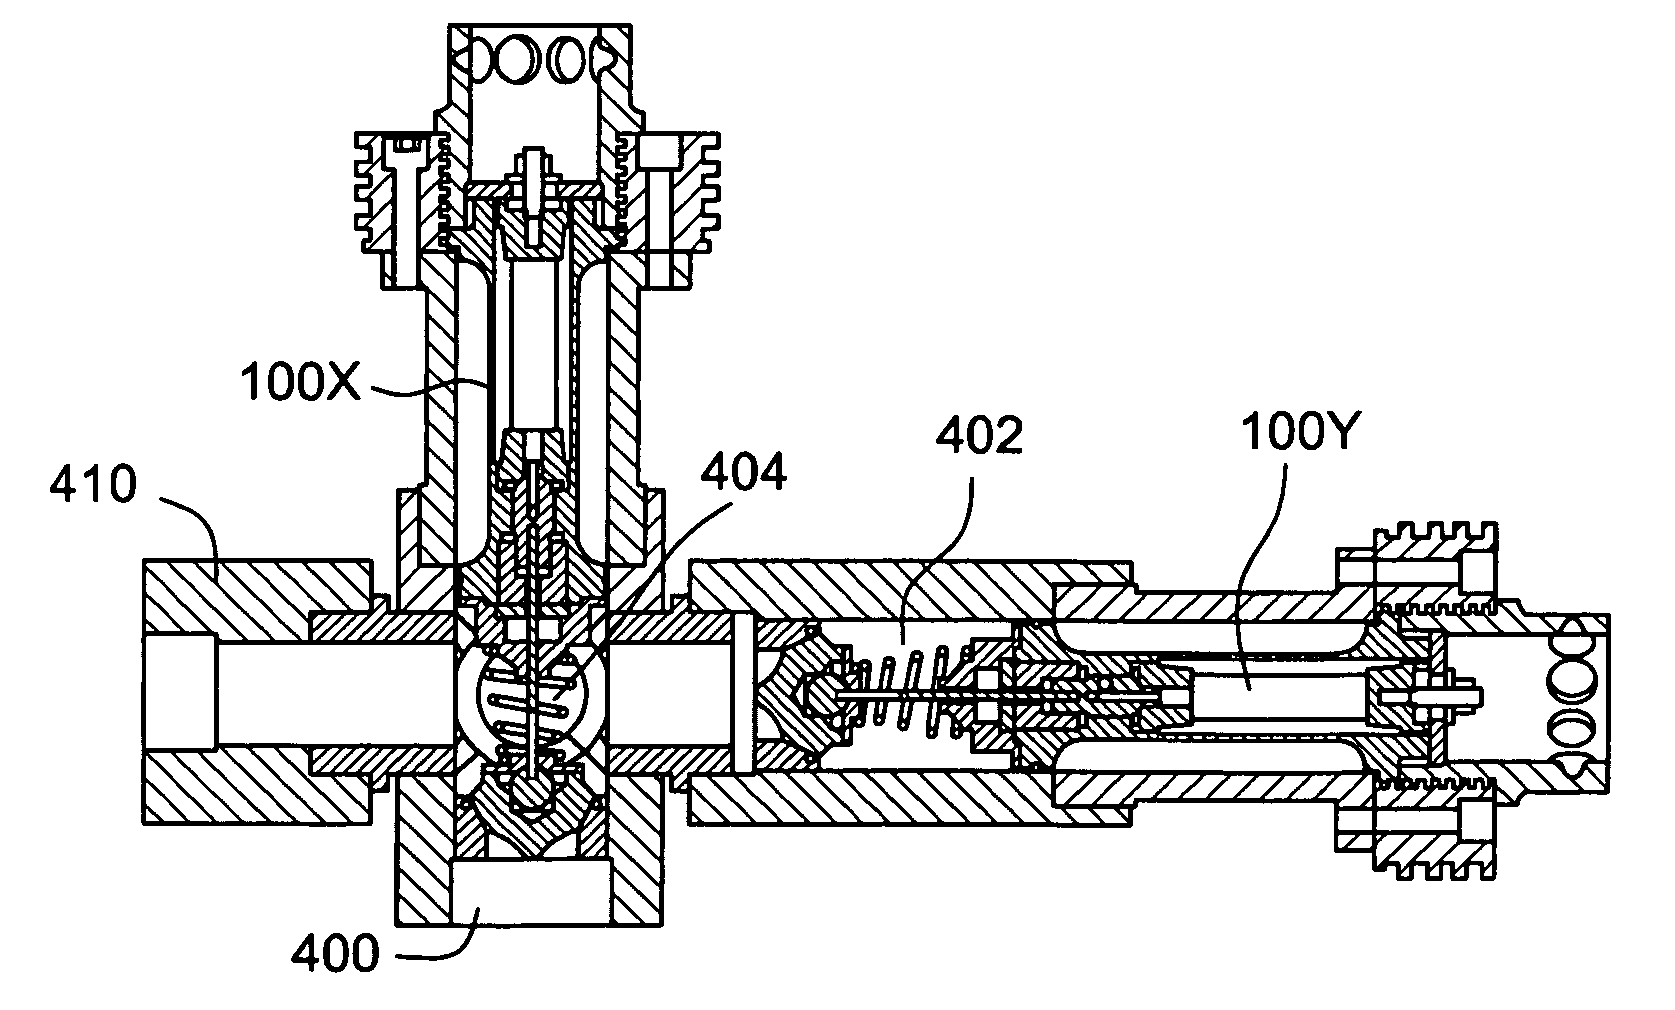 Mud pump systems for wellbore operations